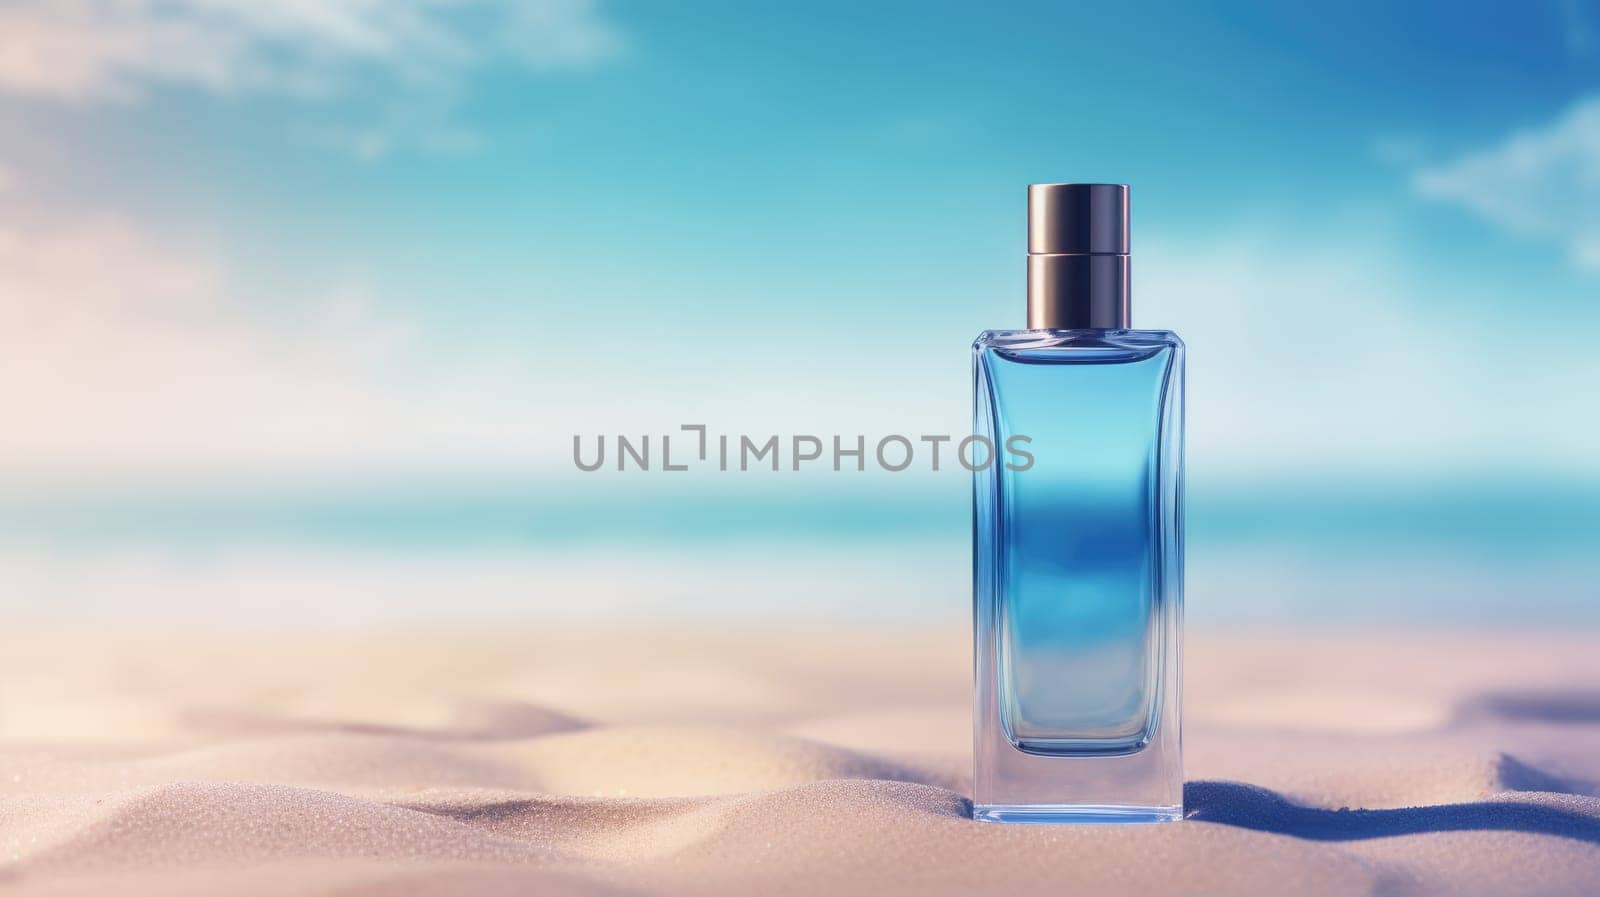 Transparent blue glass perfume bottle mockup with sandy beach and ocean waves on background. Eau de toilette. Mockup, spring flat lay. by JuliaDorian